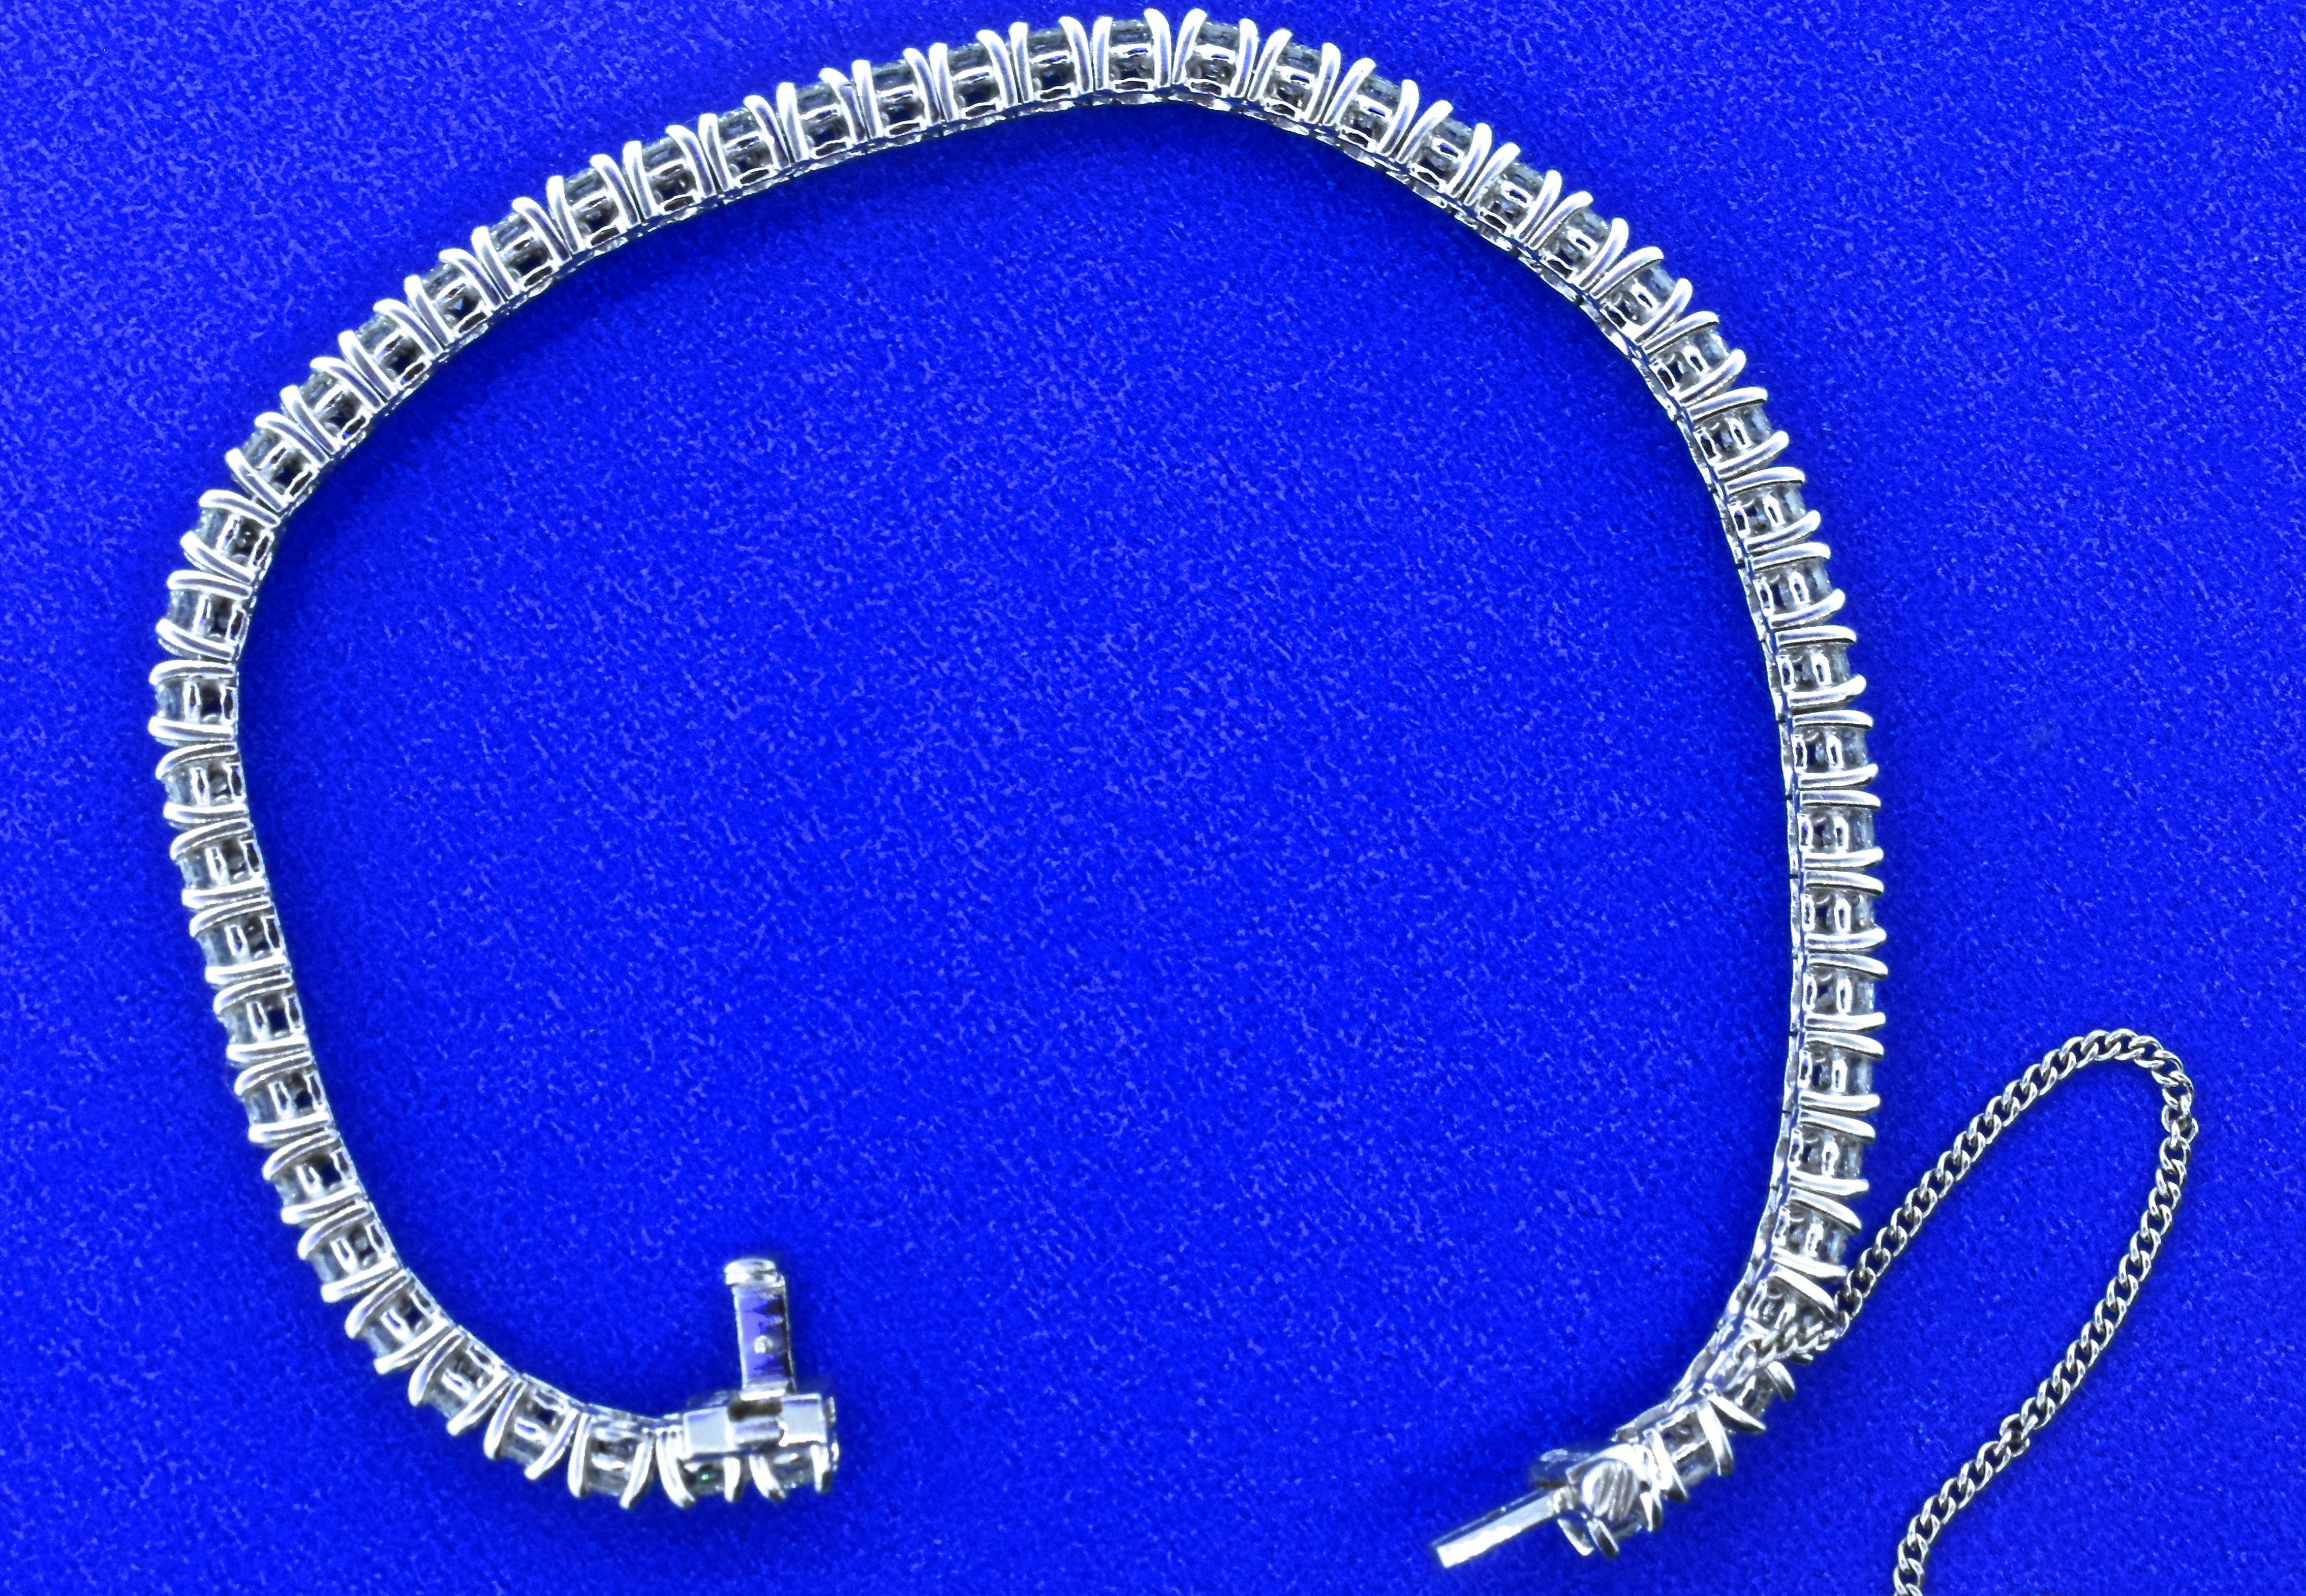 Diamond bracelet with 52 very fine diamonds.  All of the brilliant cut diamonds are well cut, with fine symmetry, color and clarity.  Our in-house GIA gemologist estimates the color of all of these finely matched stones to be G (near colorless), and